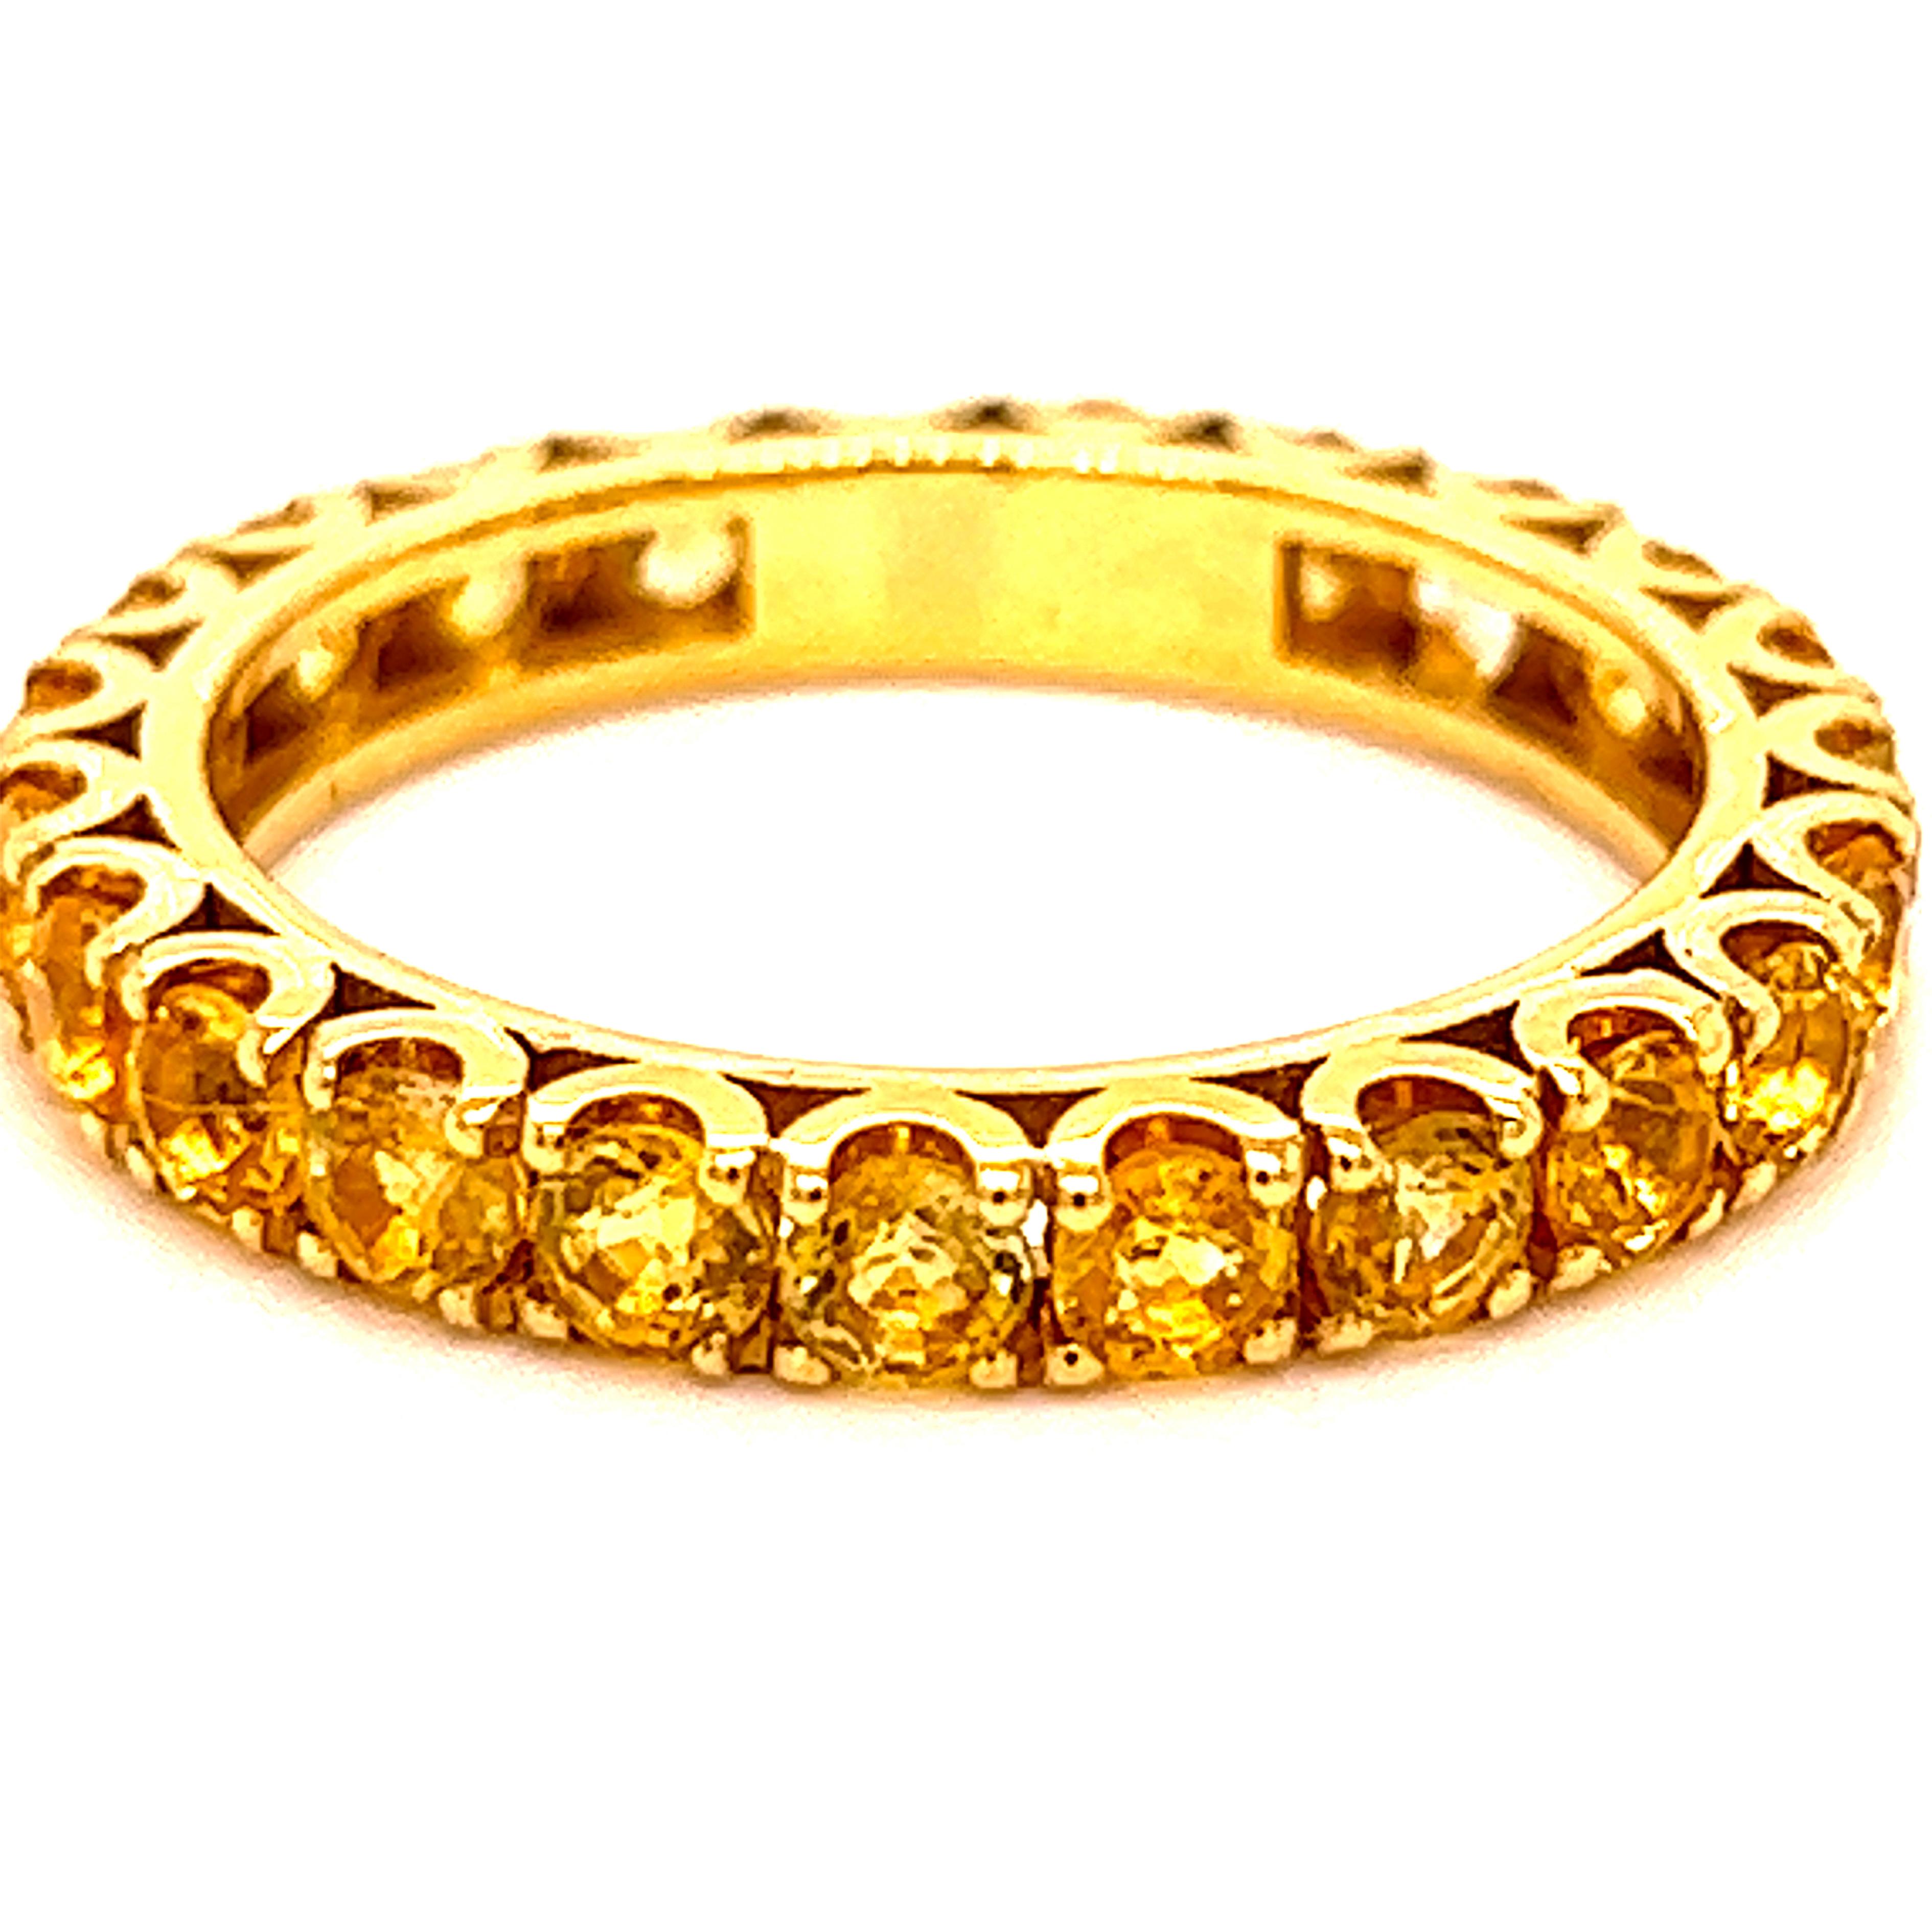 Beautifully hand crafted Eternity Band featuring 24 round brilliant cut Natural Yellow Sapphire for a total weight of 2.93Carat in an 18Kt Yellow Gold fish tail setting.
US Size 6 1/2
French Size 53
In our fitted dark brown suede leather and